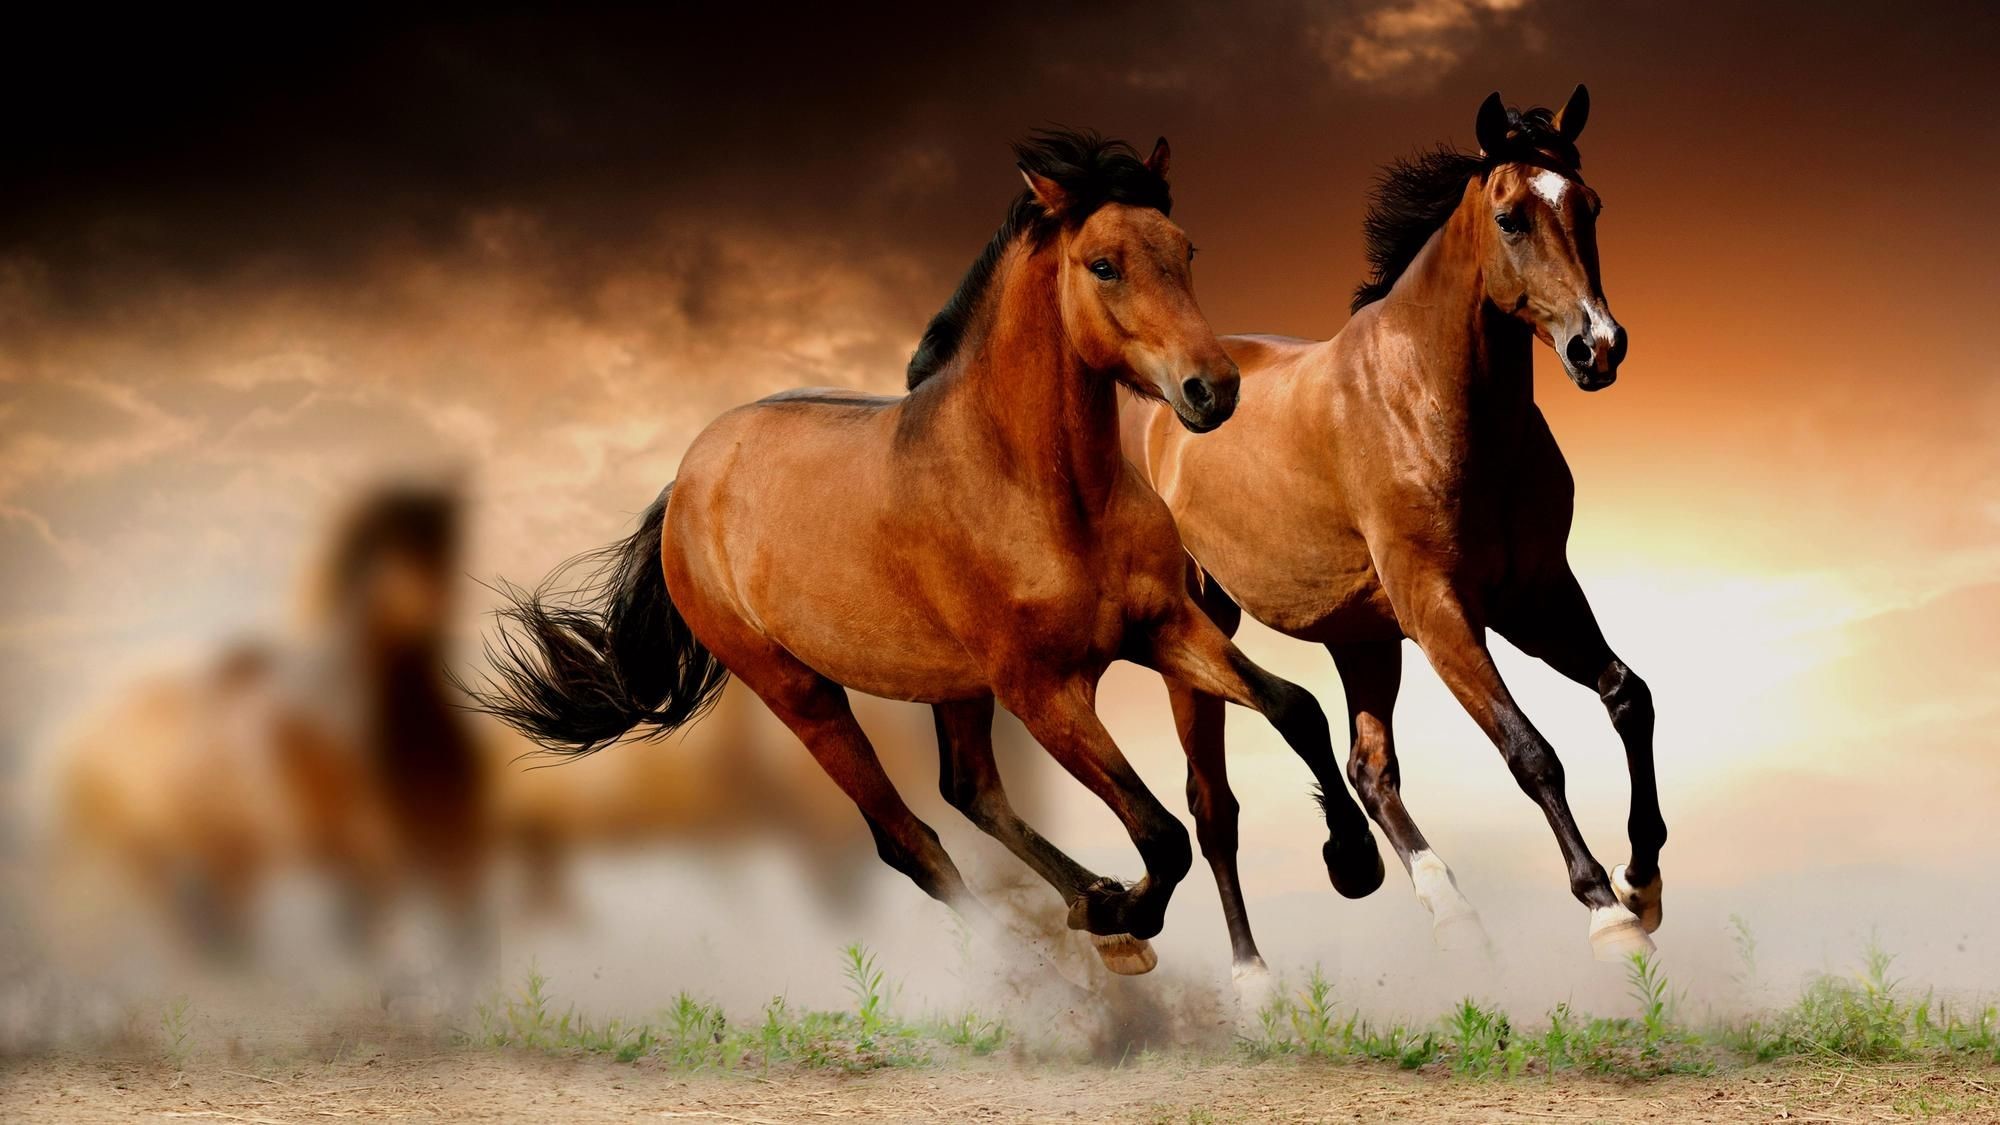 2000x1125 Horse Wallpapers HD Download